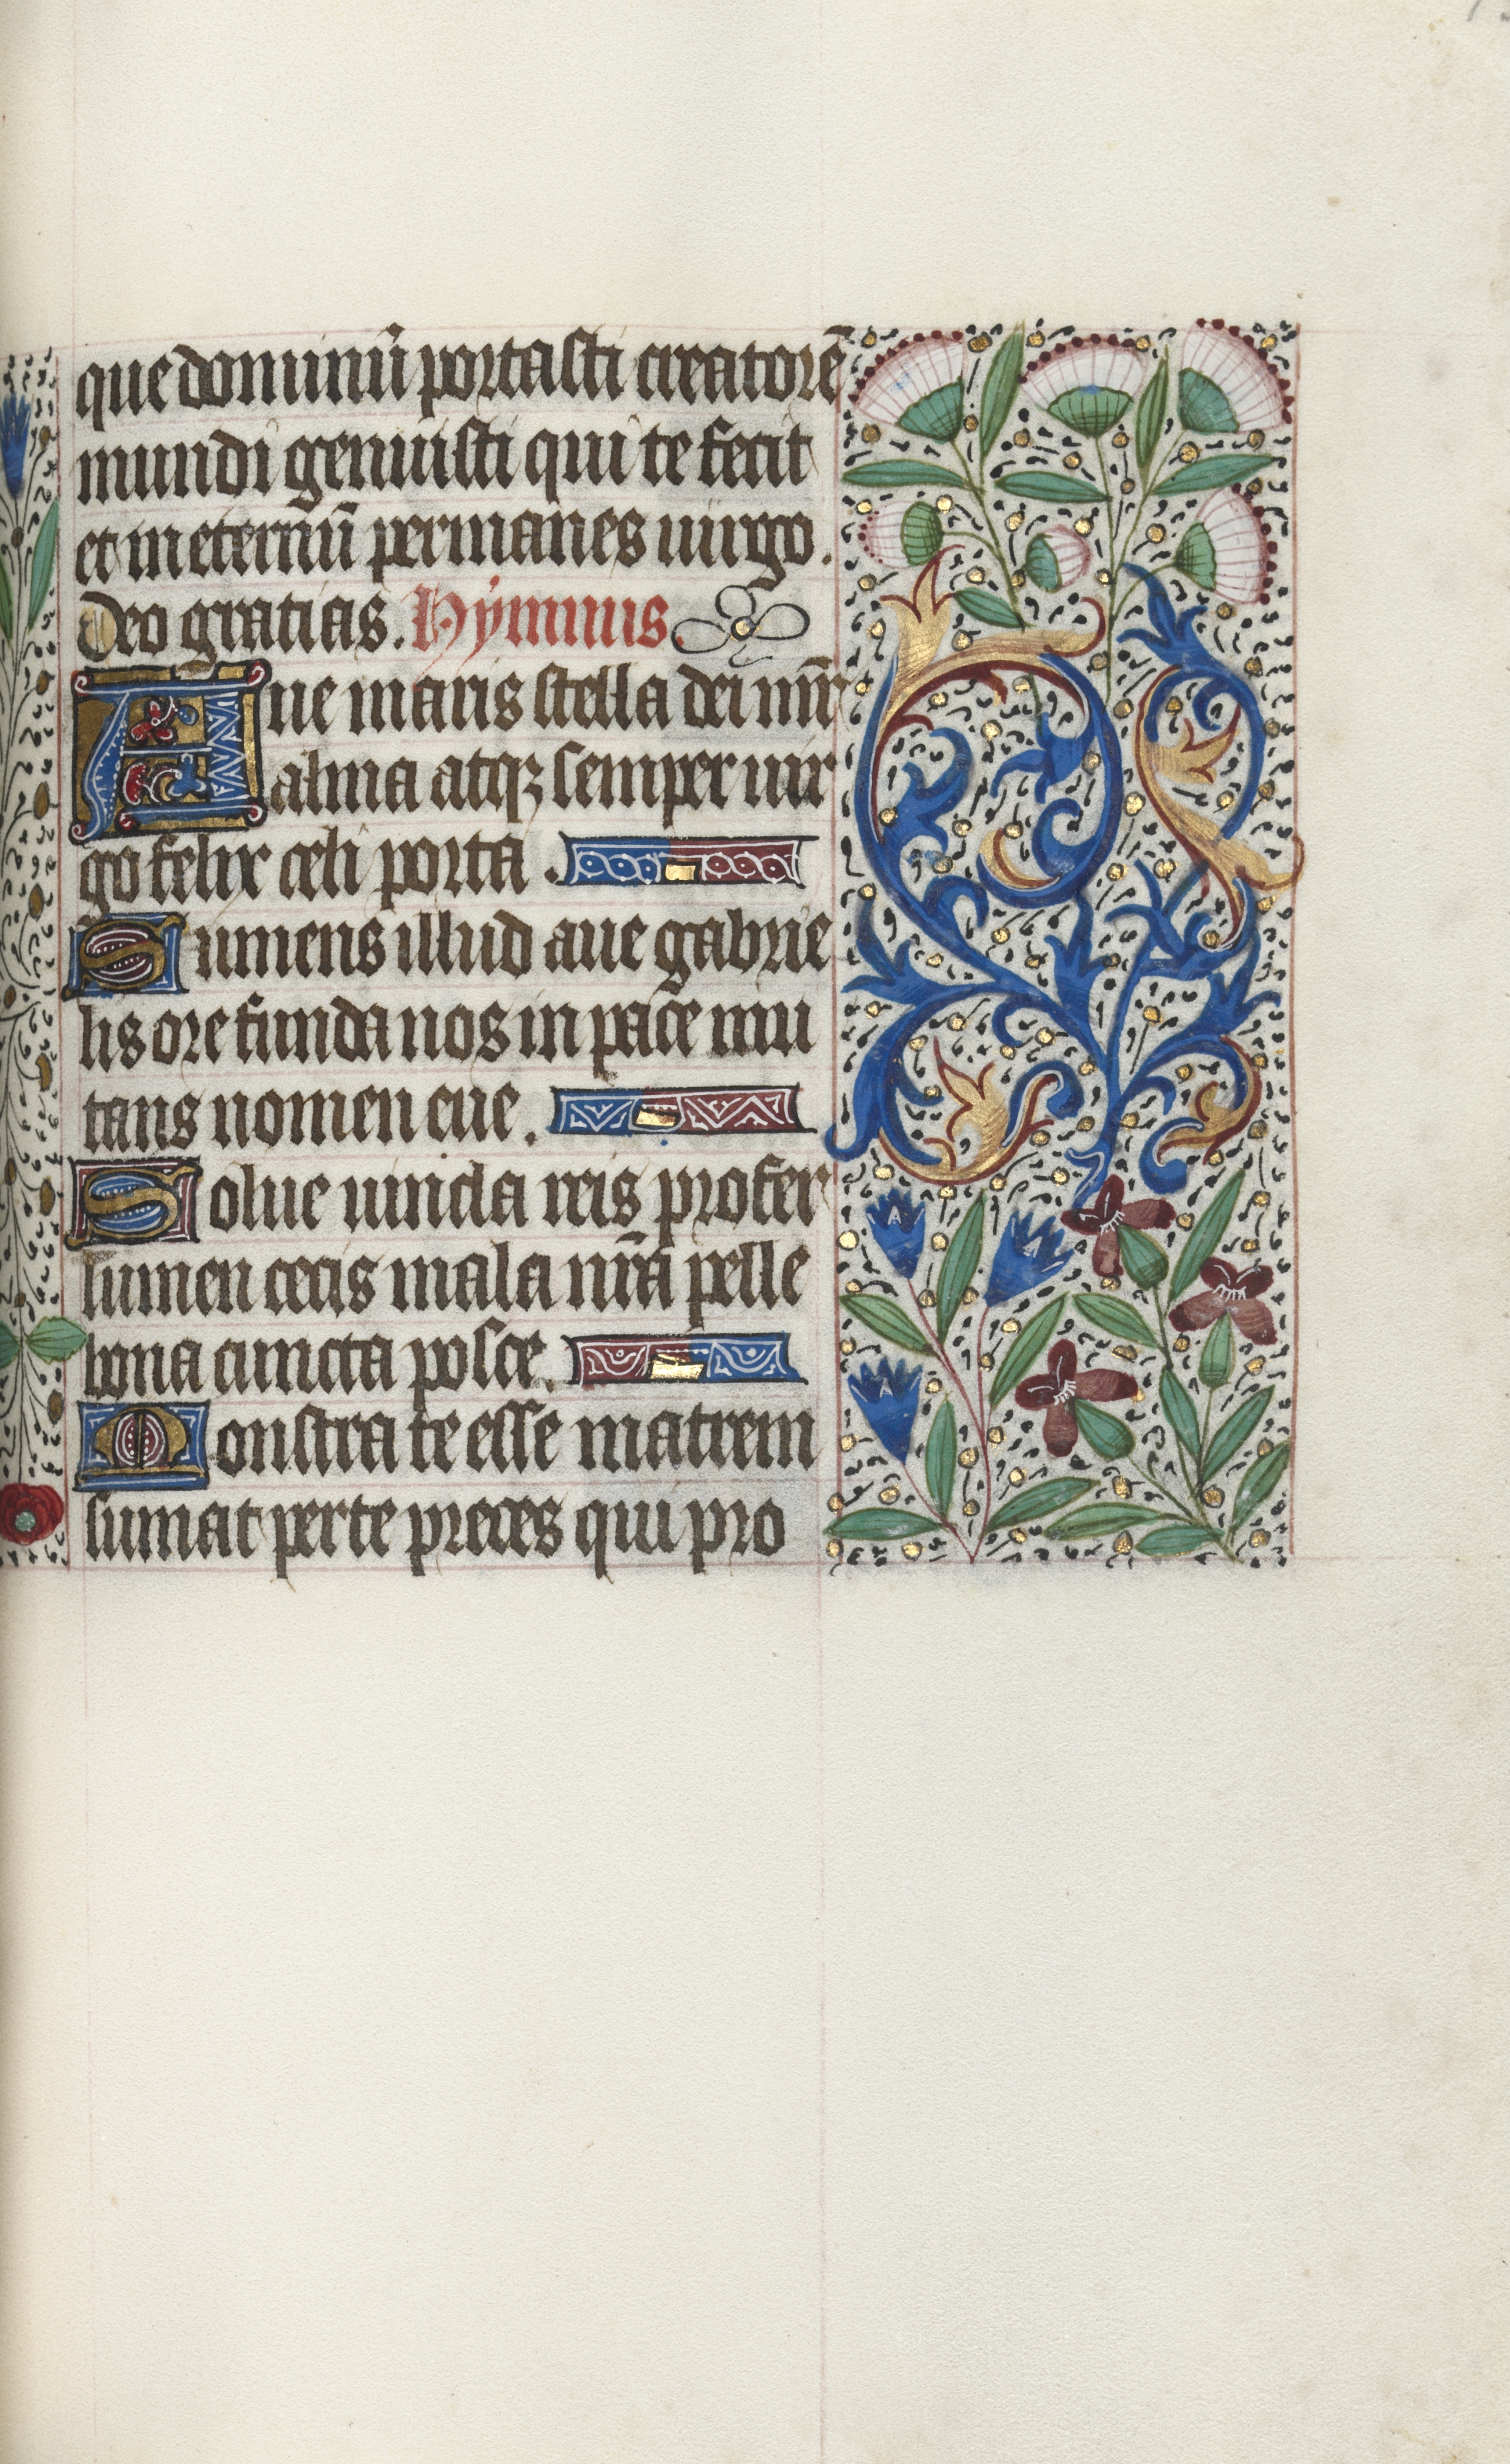 Book of Hours (Use of Rouen): fol. 73r